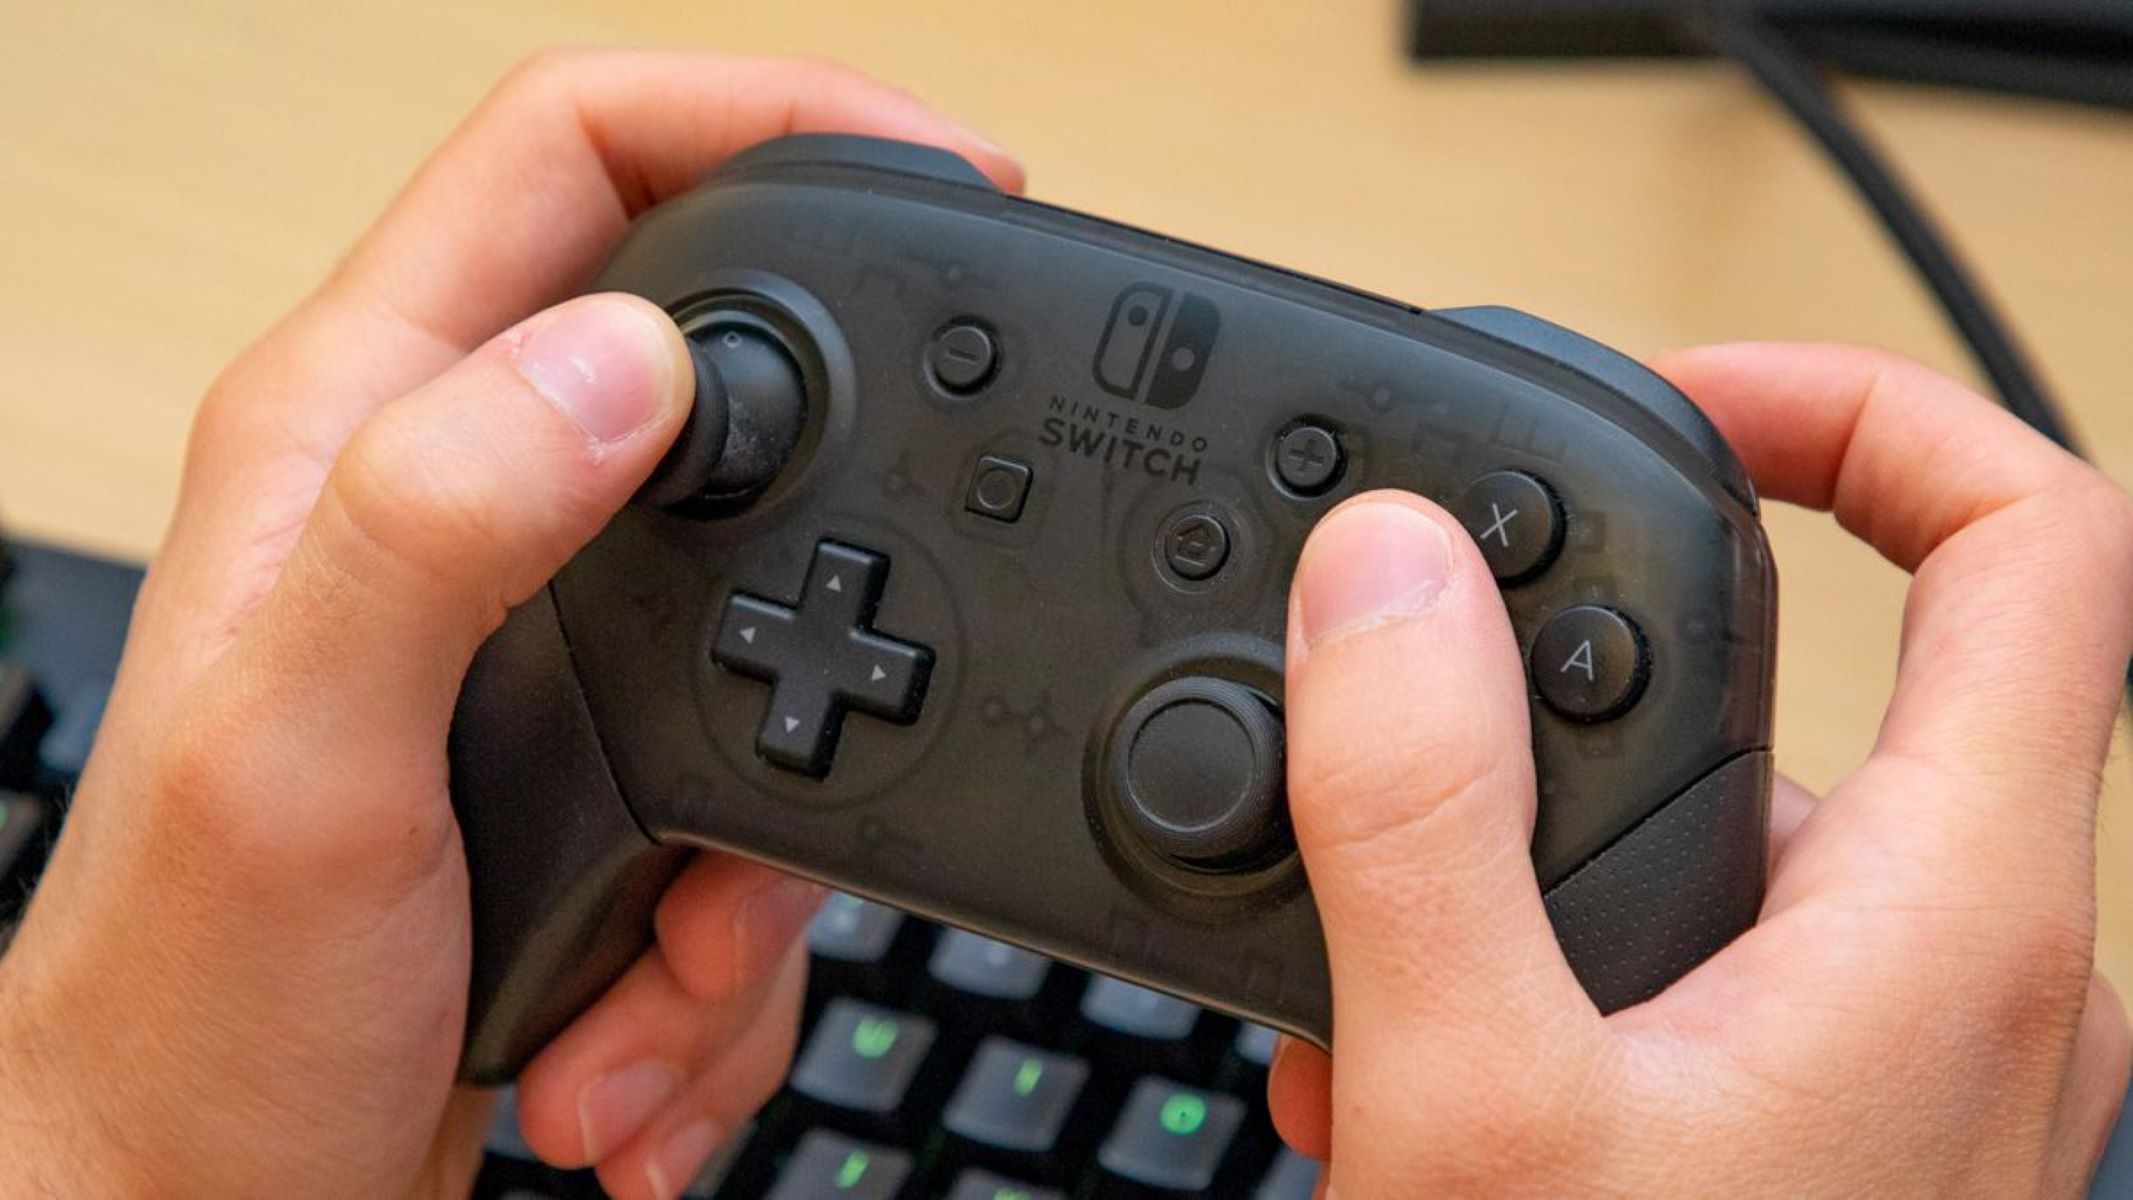 Managing Gamepad And Pro Controller: Turning Off Gamepad While Using Pro Controller